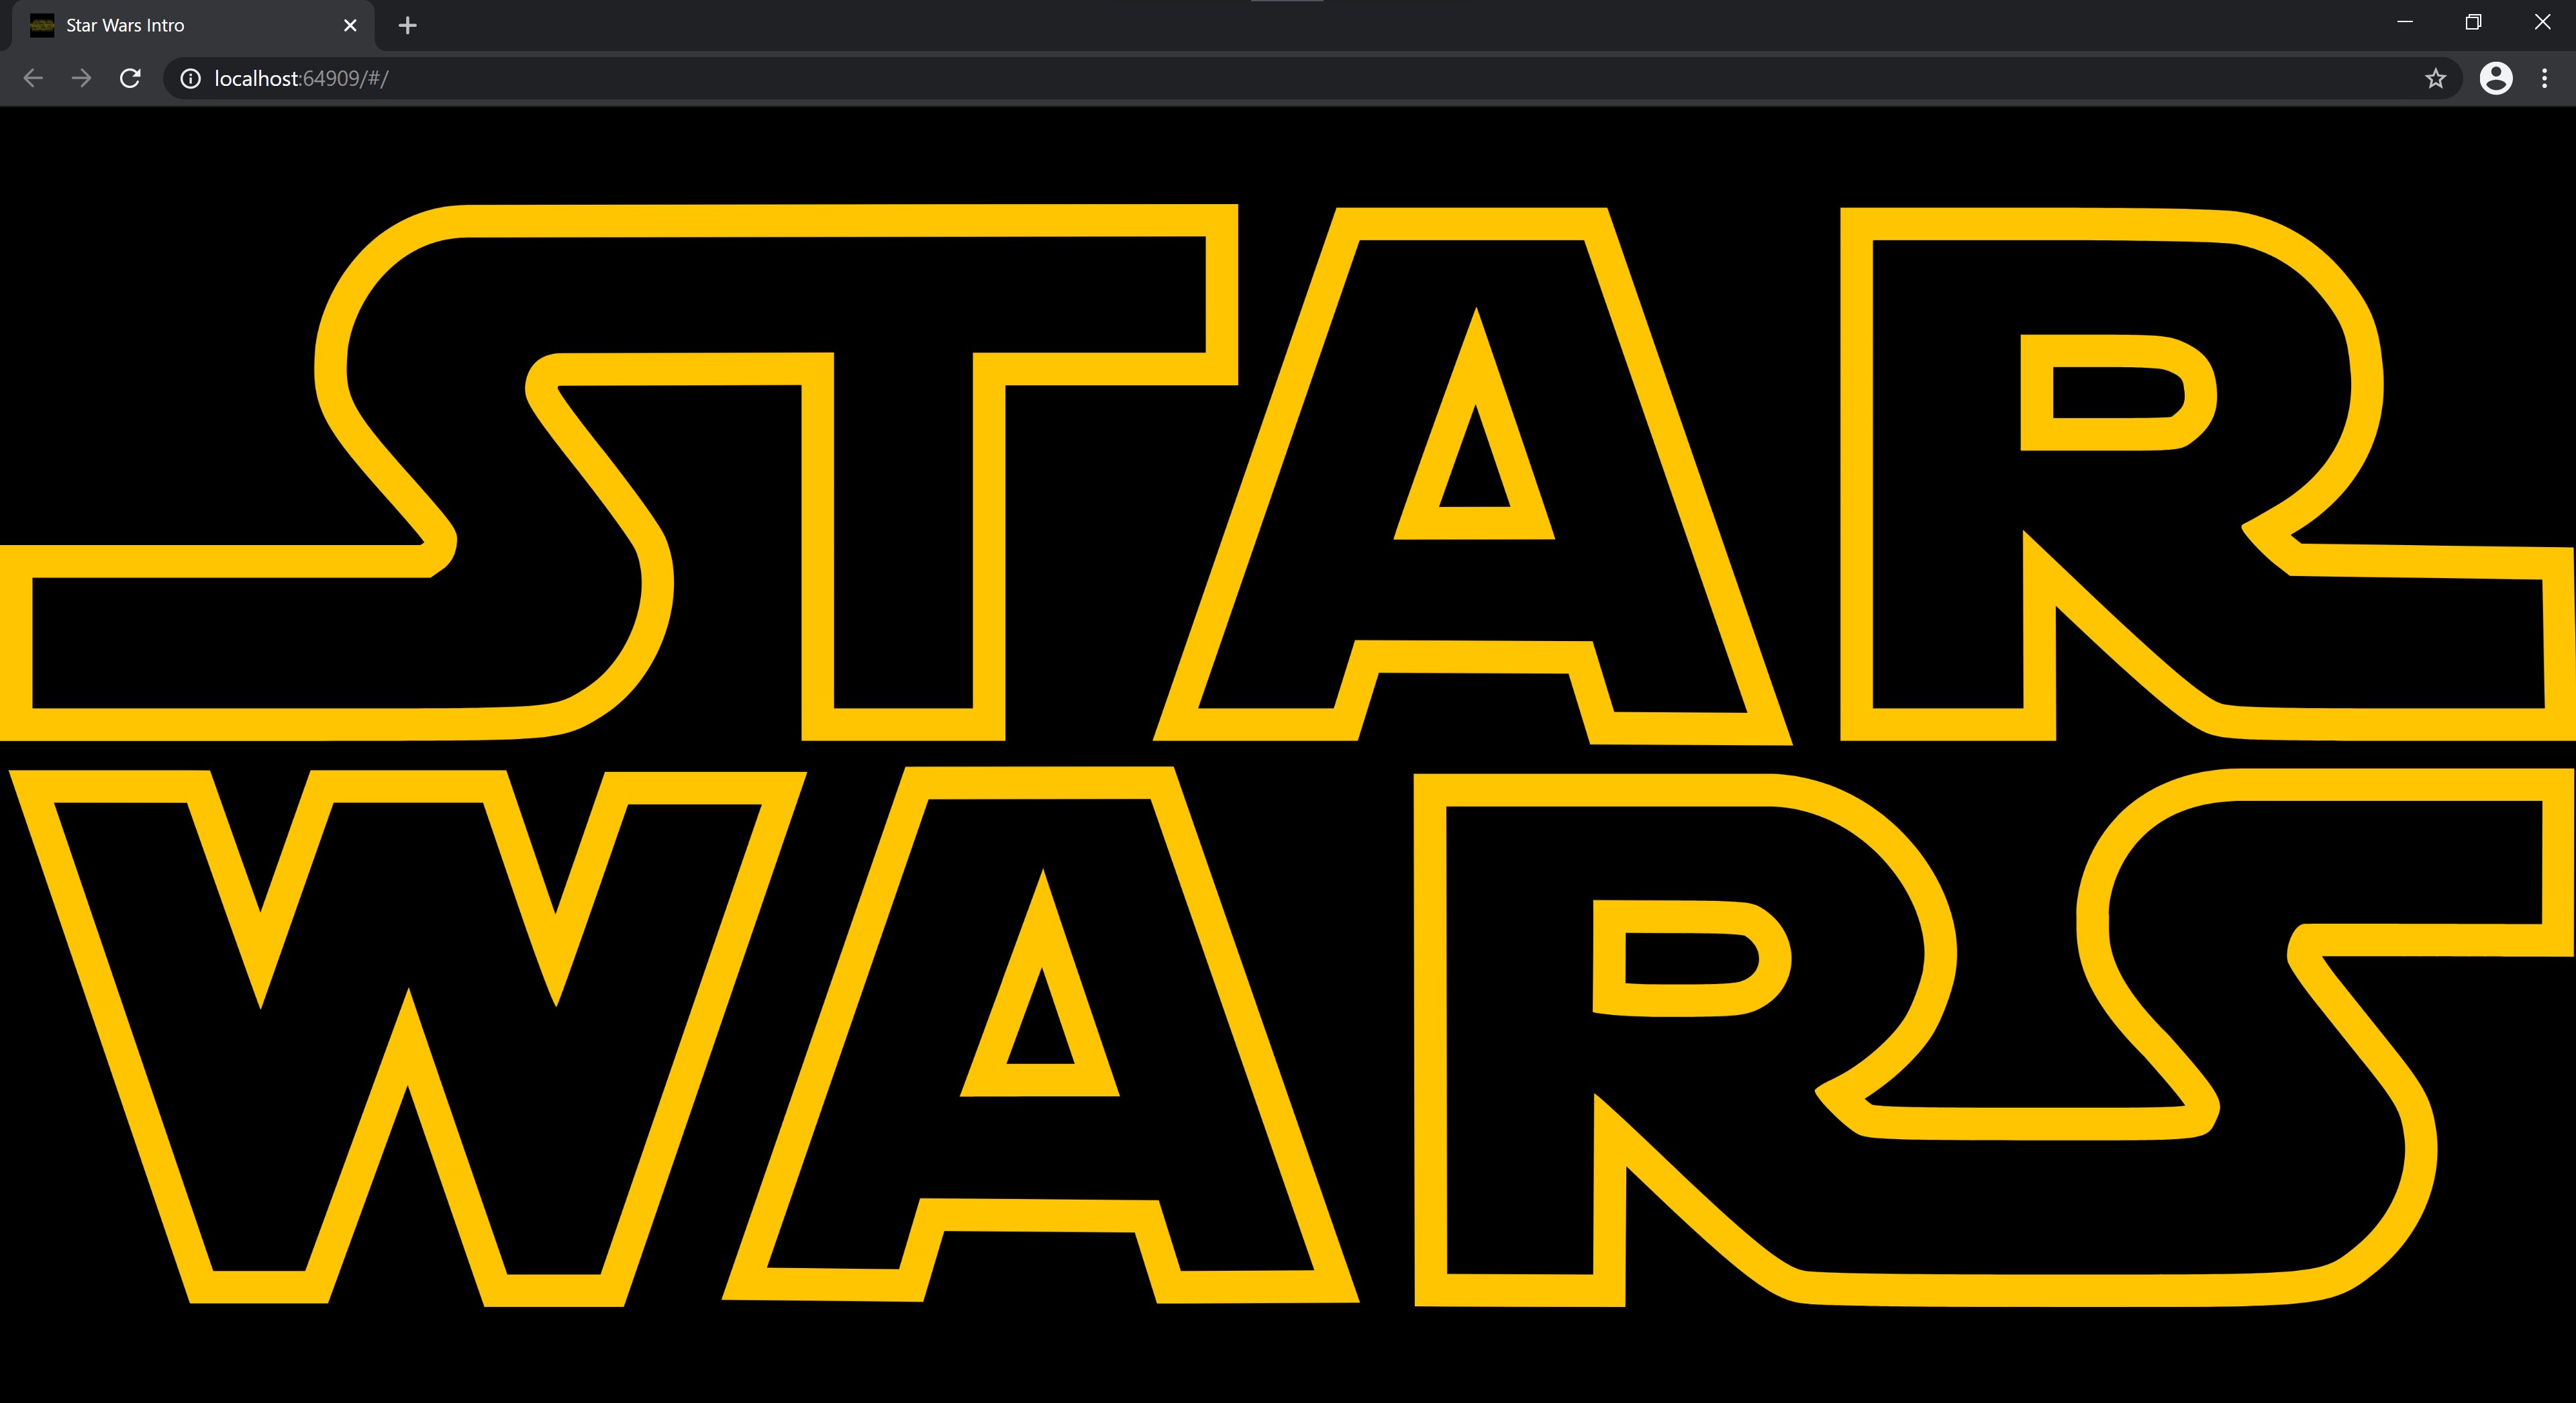 The Star Wars logo showing in a browser window